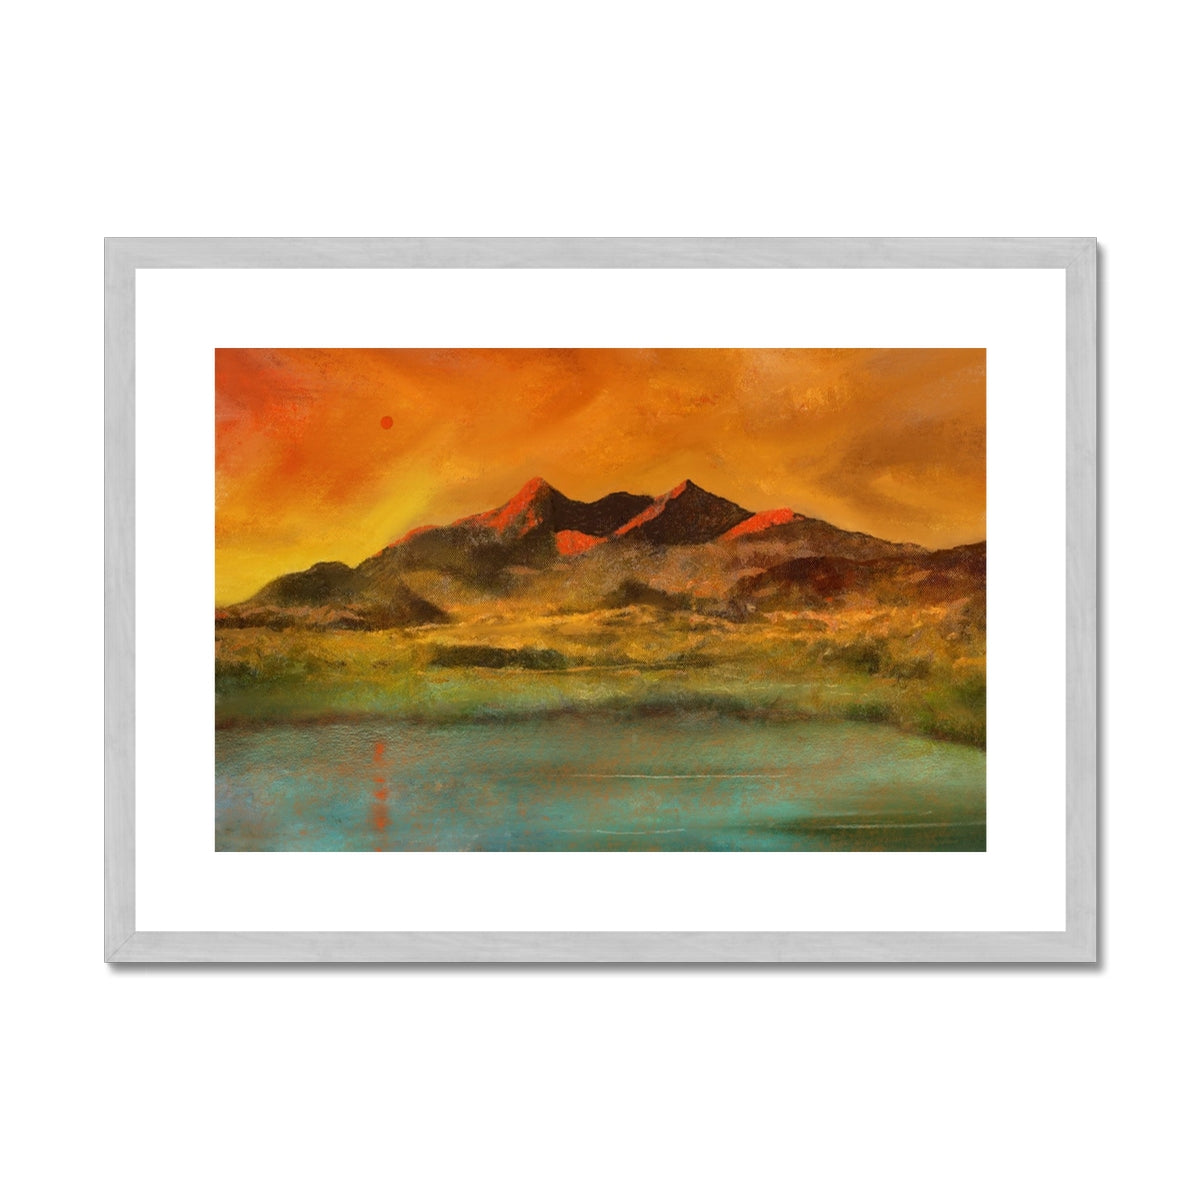 Skye Red Moon Cuillin Painting | Antique Framed & Mounted Prints From Scotland-Antique Framed & Mounted Prints-Skye Art Gallery-A2 Landscape-Silver Frame-Paintings, Prints, Homeware, Art Gifts From Scotland By Scottish Artist Kevin Hunter